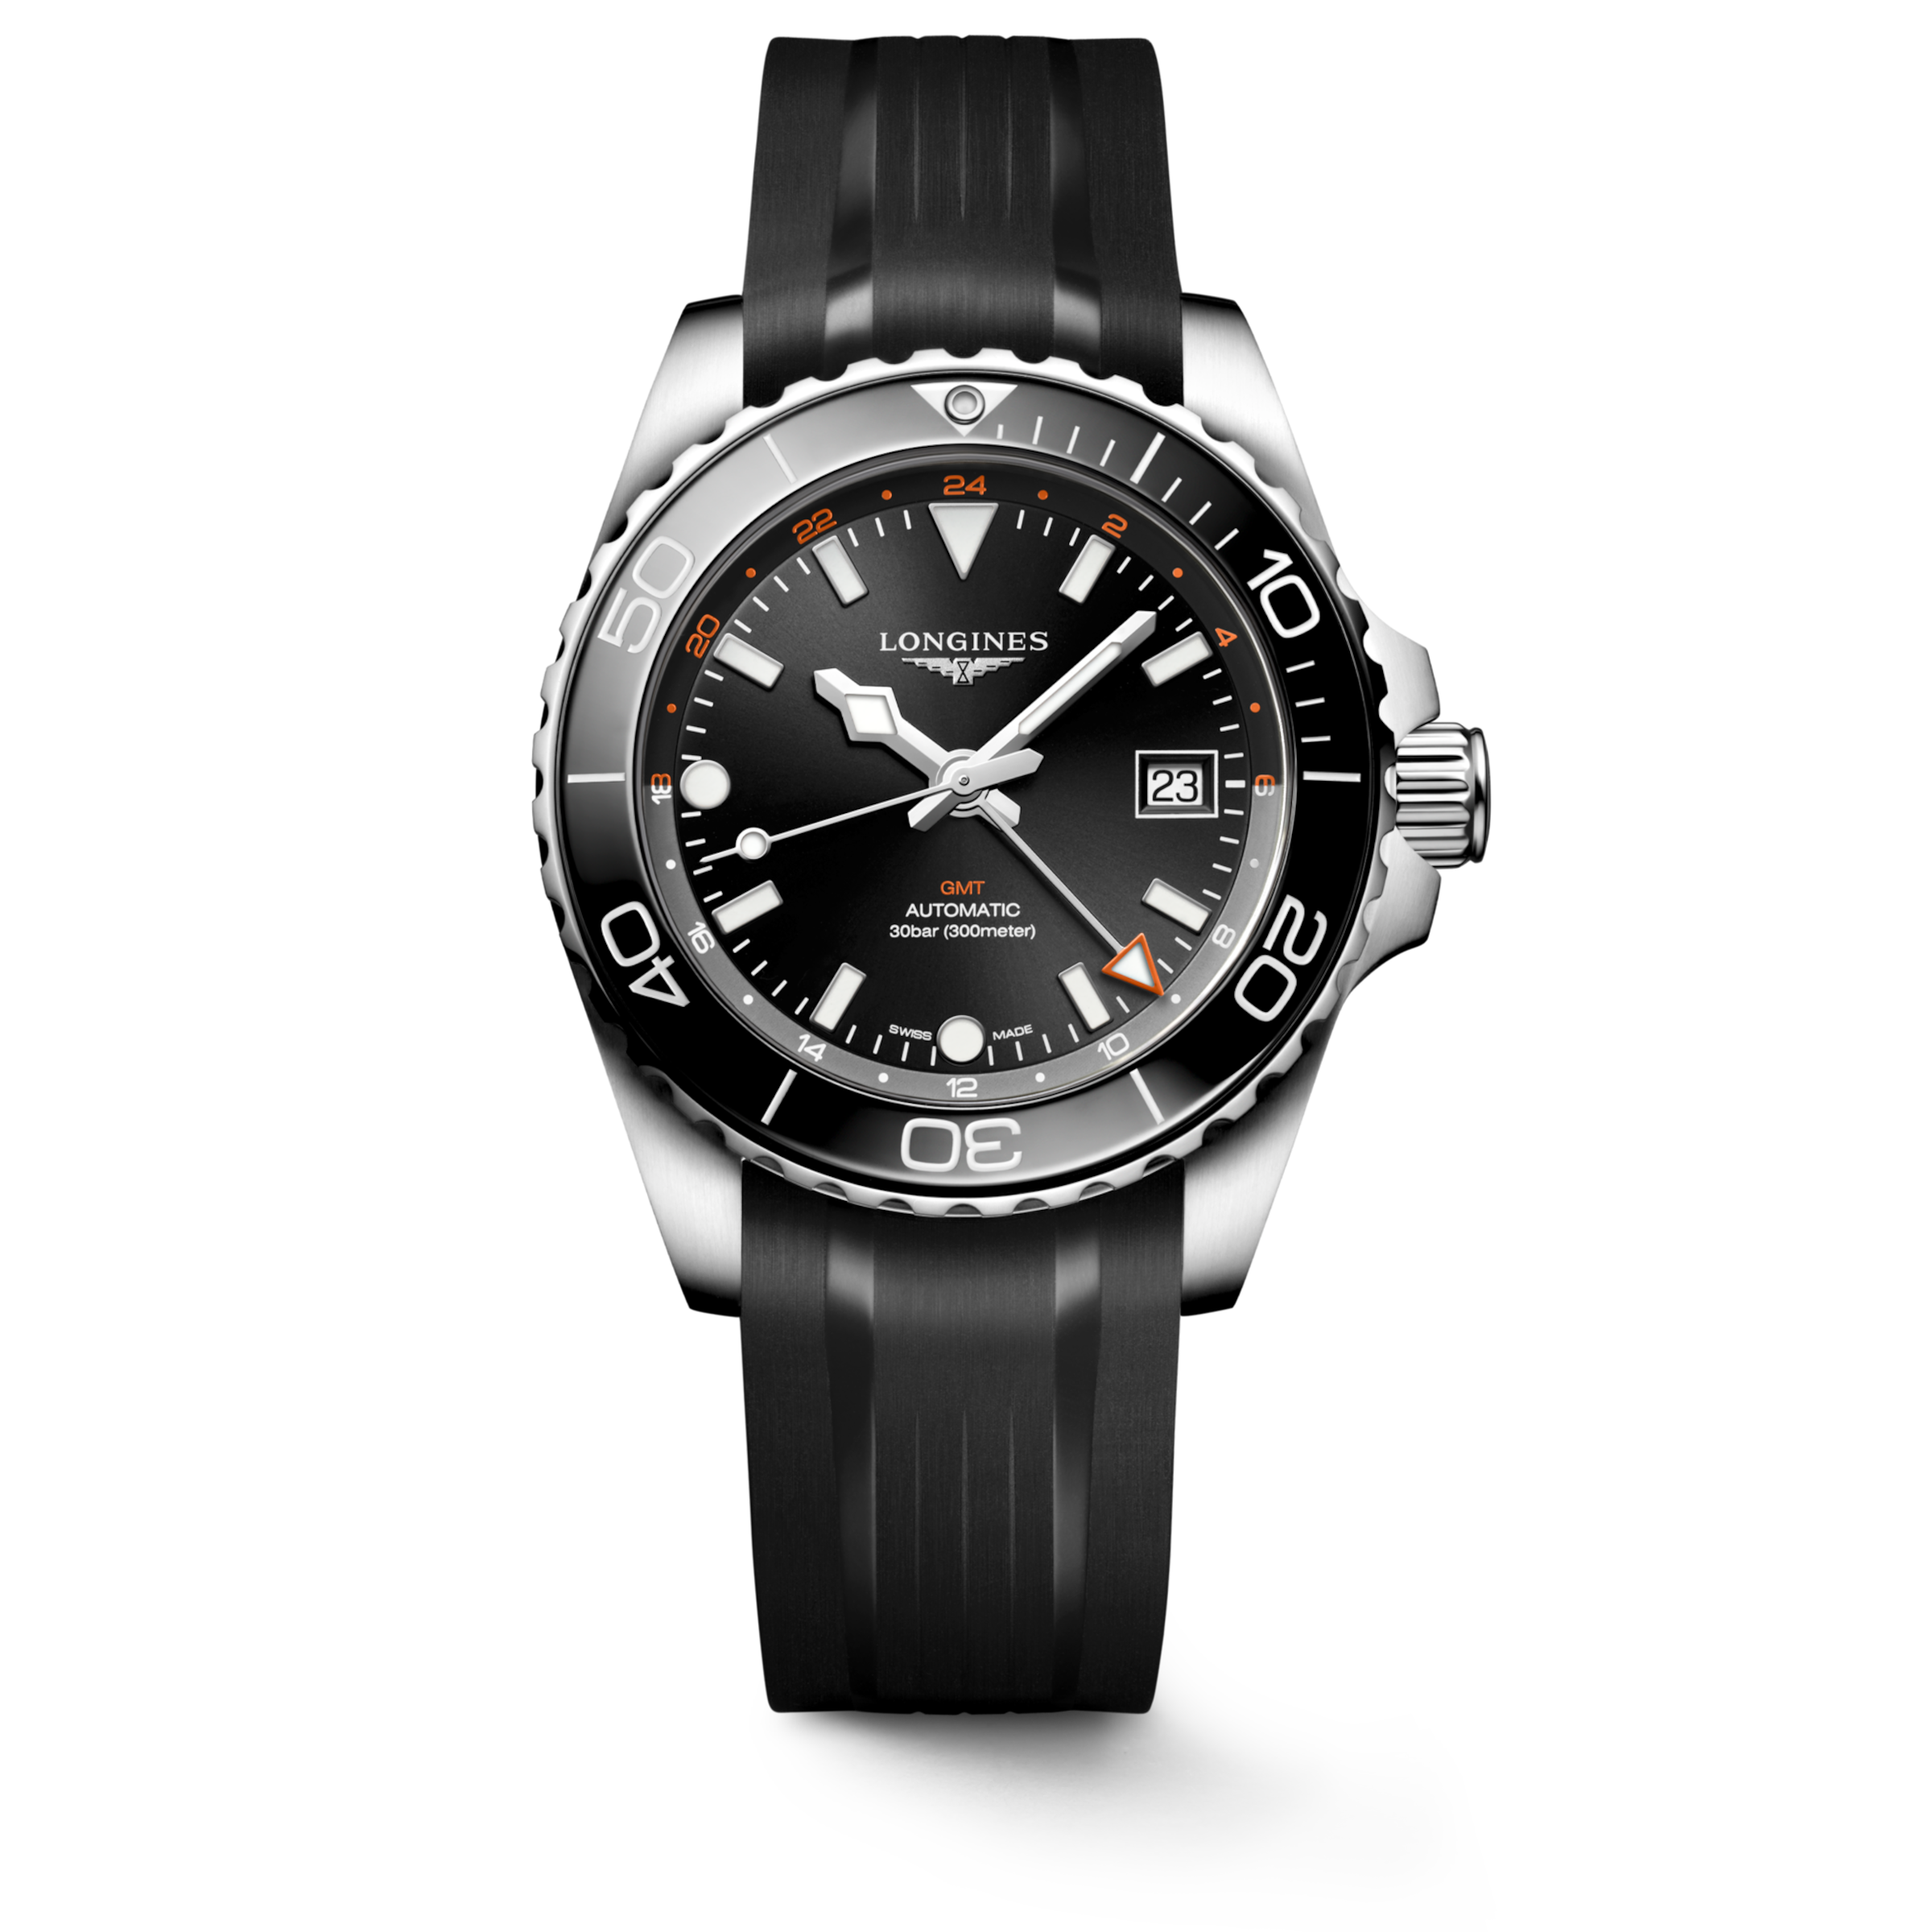 Longines HYDROCONQUEST Automatic Stainless steel and ceramic bezel Watch - L3.790.4.56.9